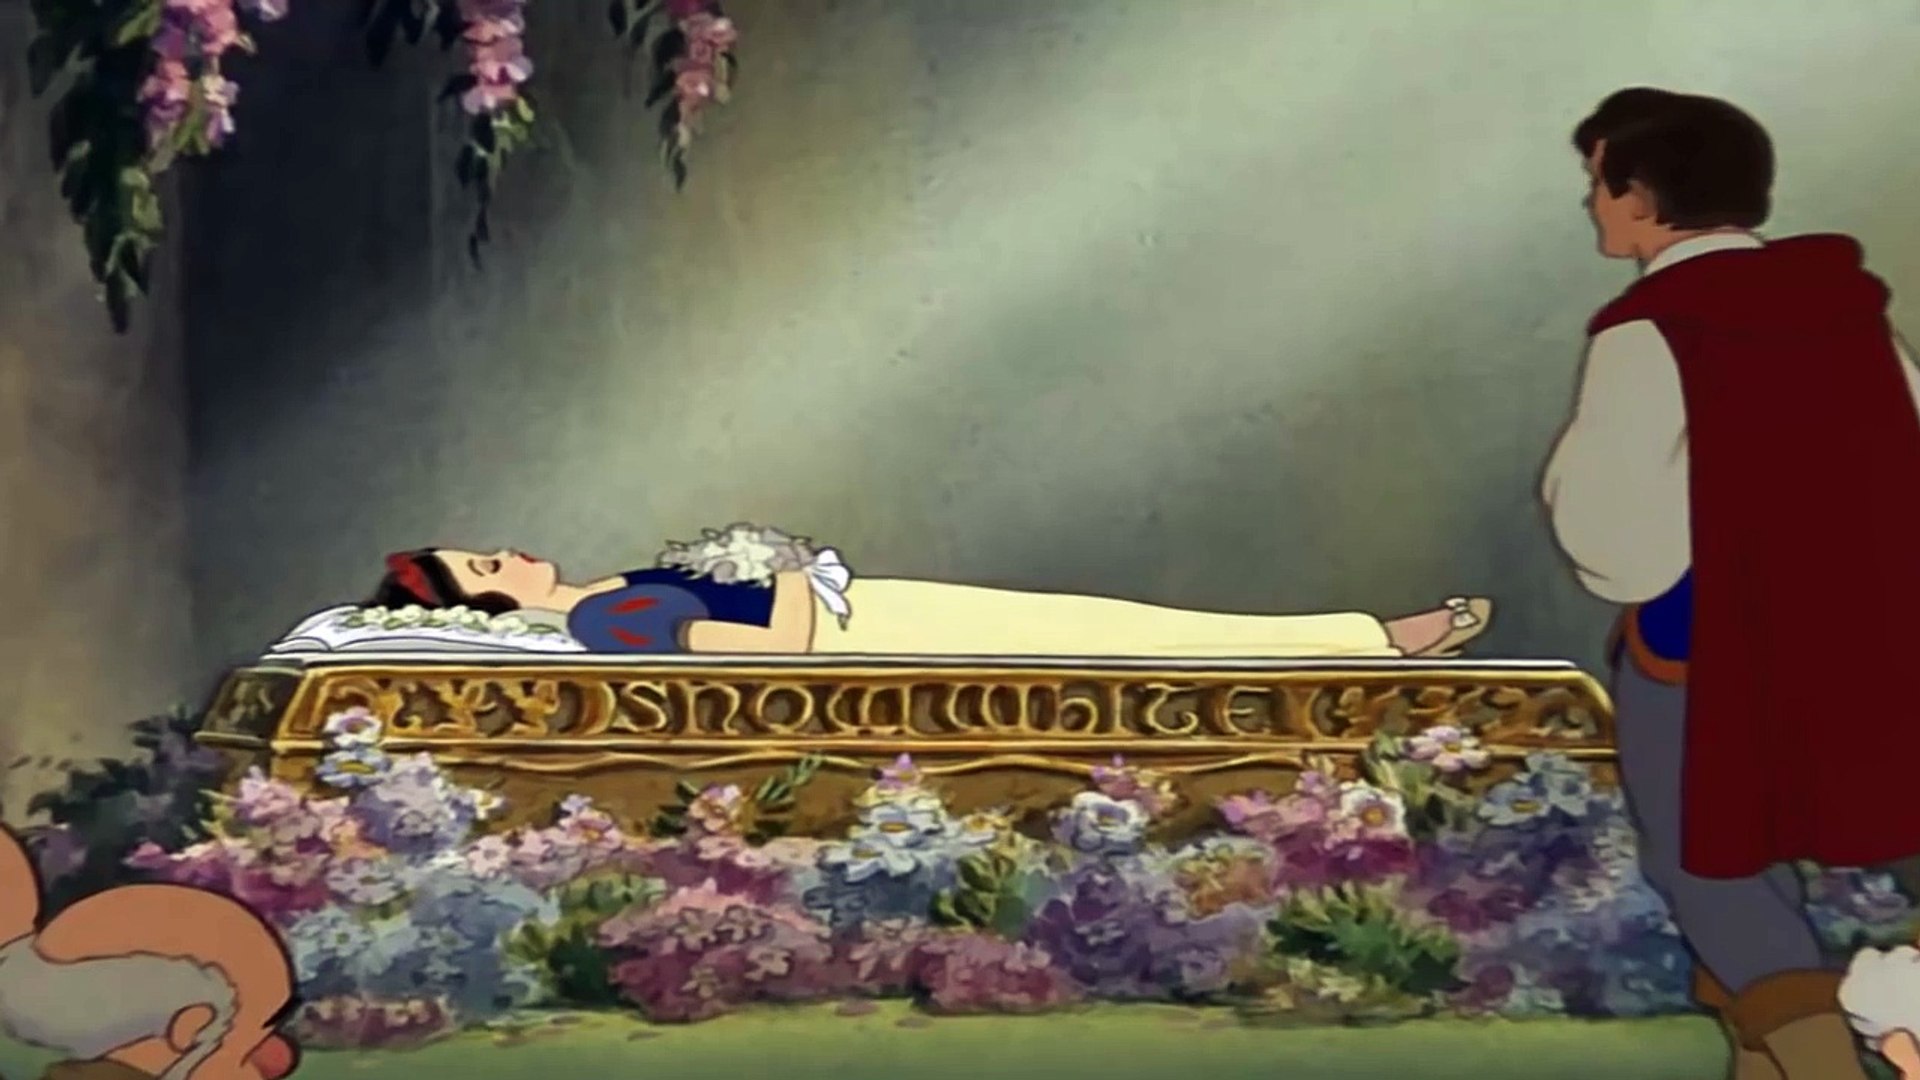 Snow White is laying in a coffin after being poisoned by her step-mother, and her true love, Prince Florian, is approaching her to give her true loves kiss and break the spell to wake her up.